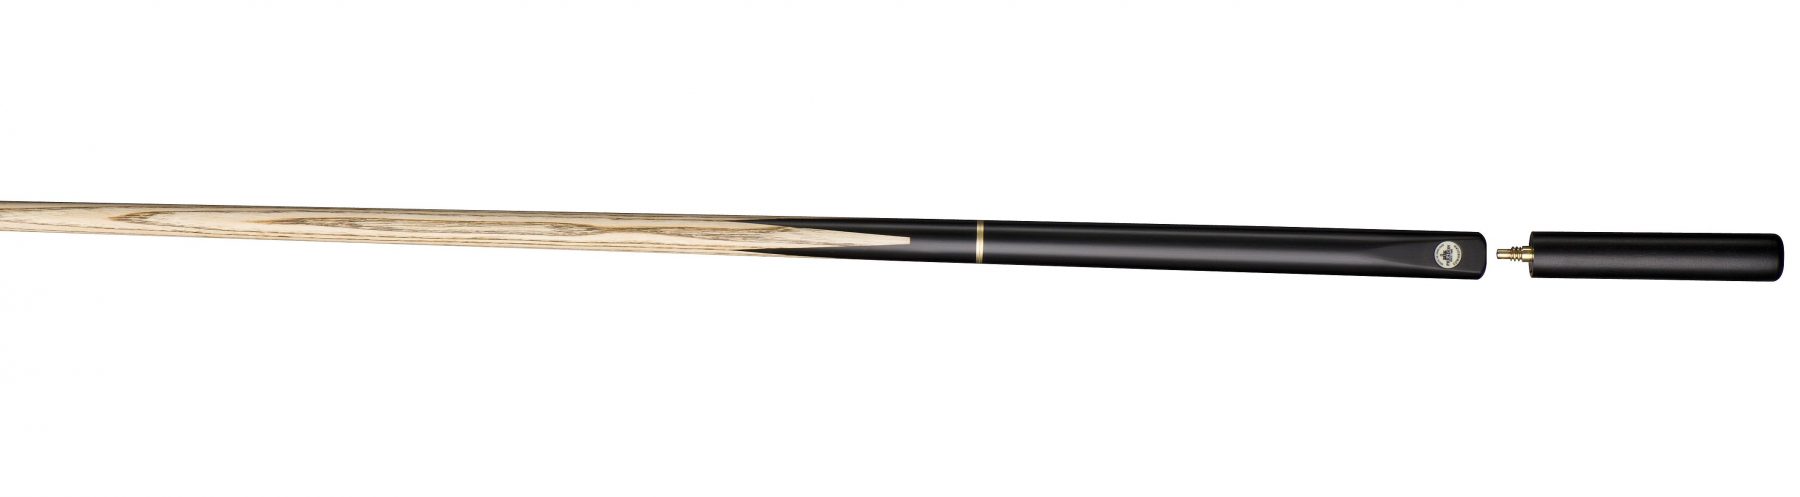 Edwardian 3/4 Jointed Cue